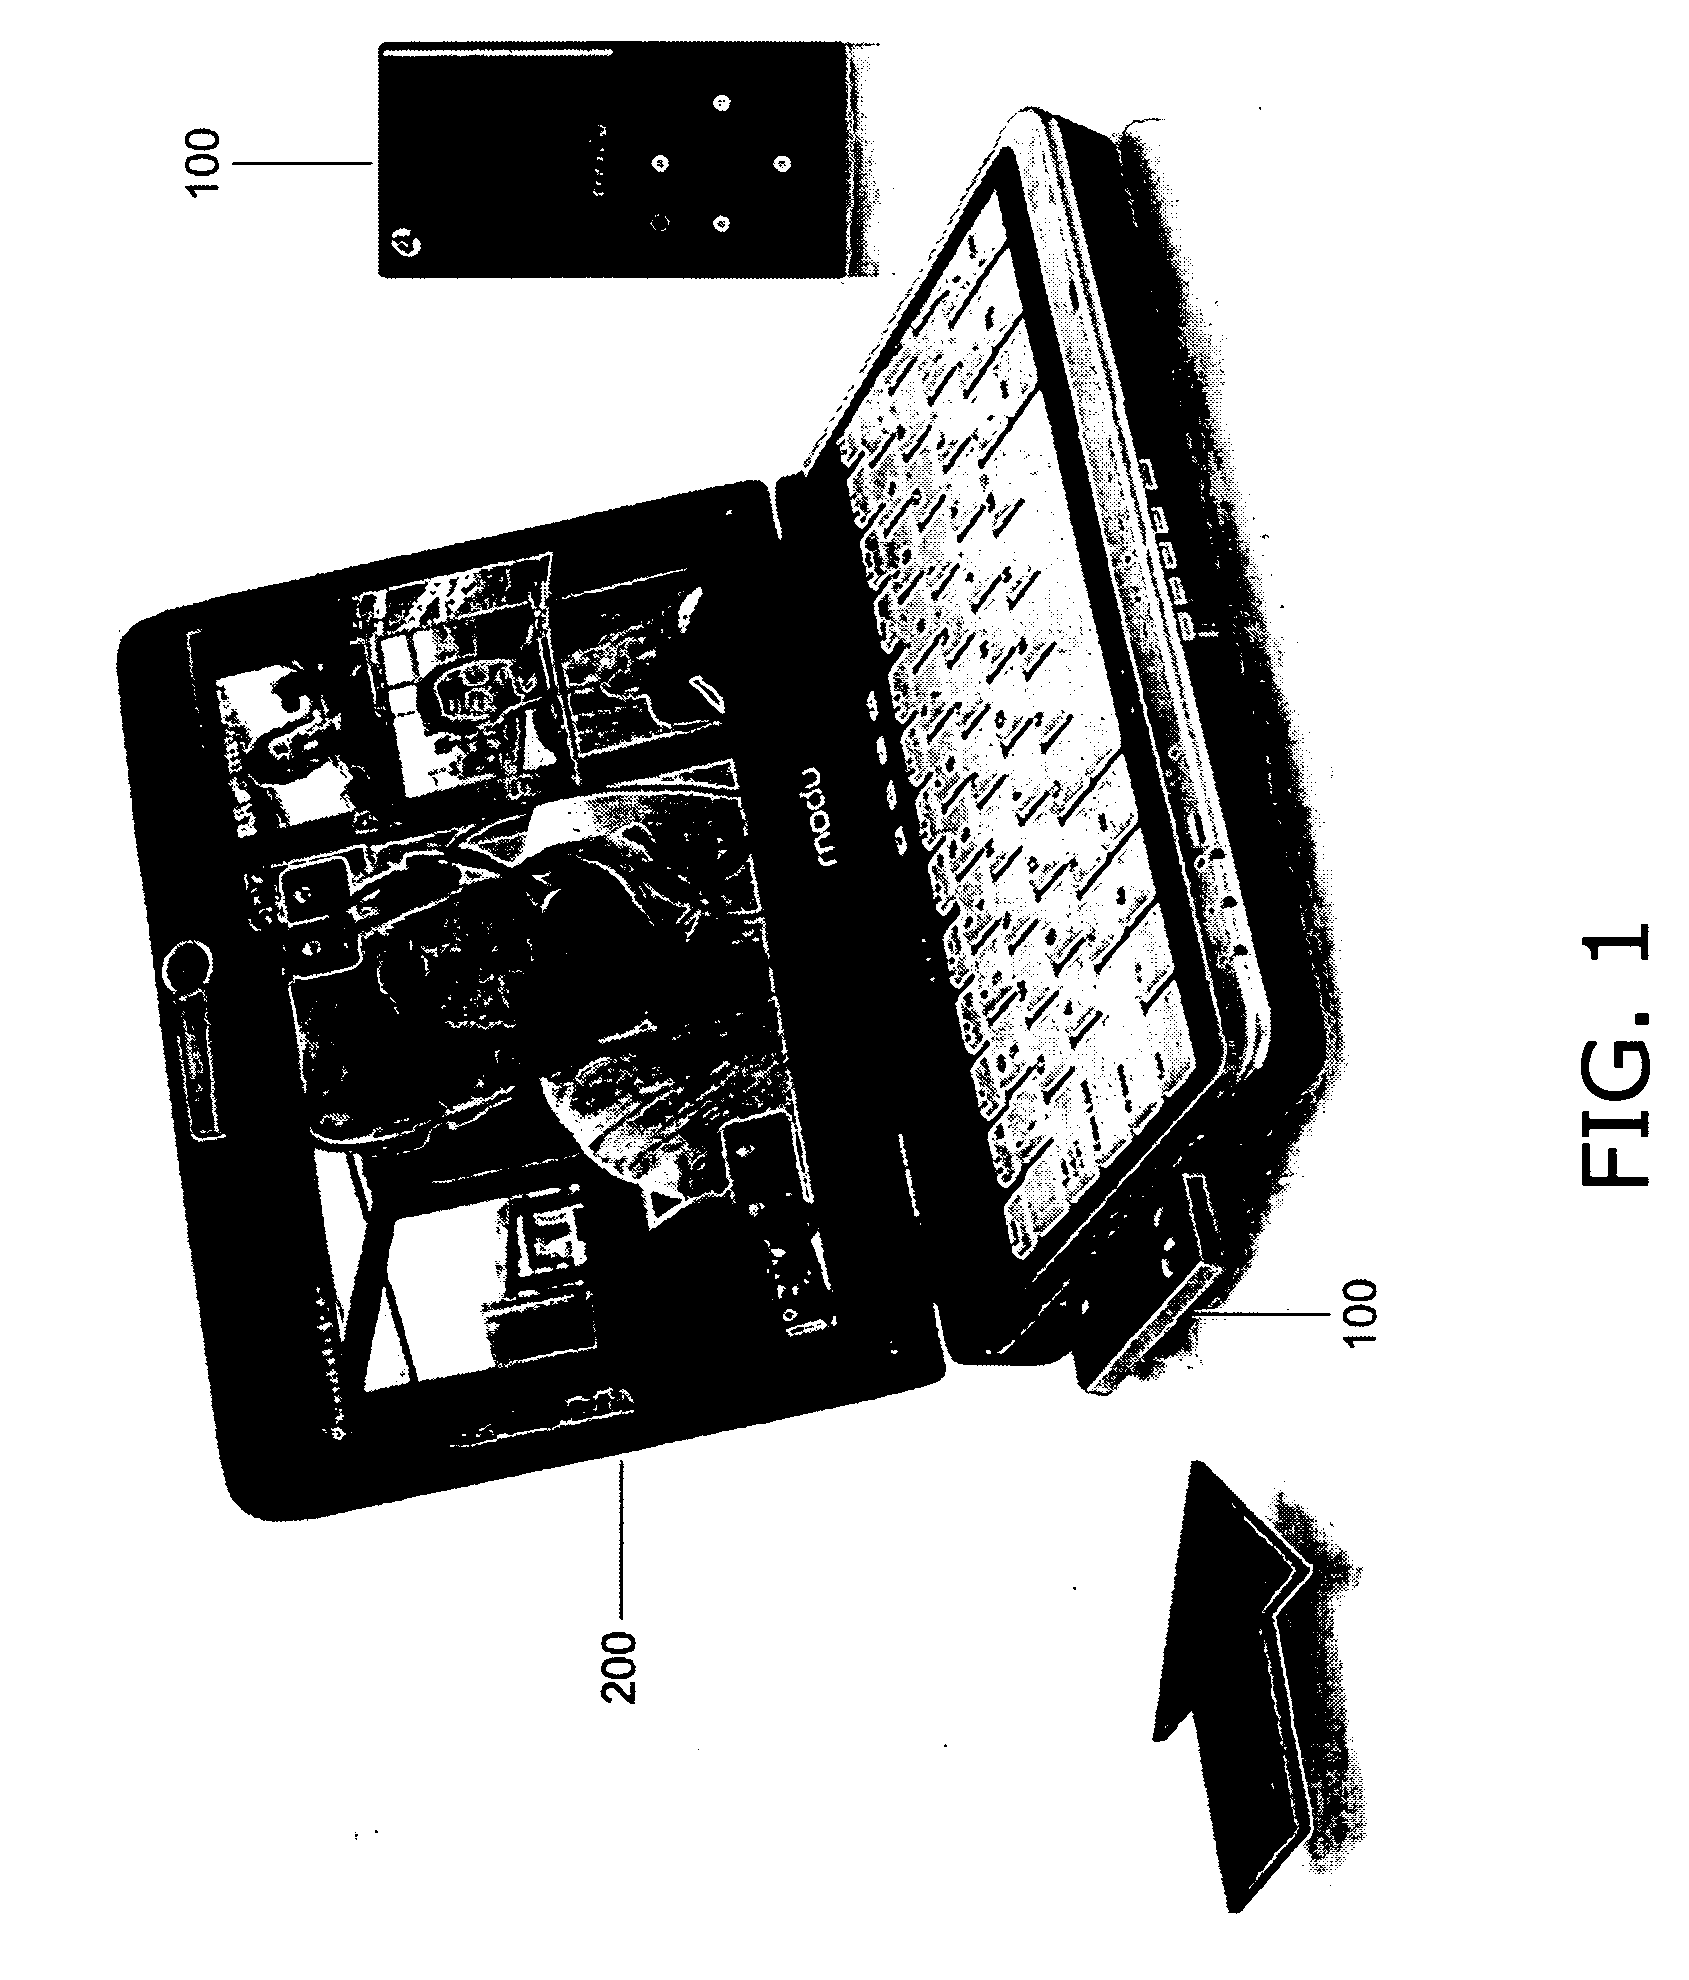 Modular cell phone for laptop computers